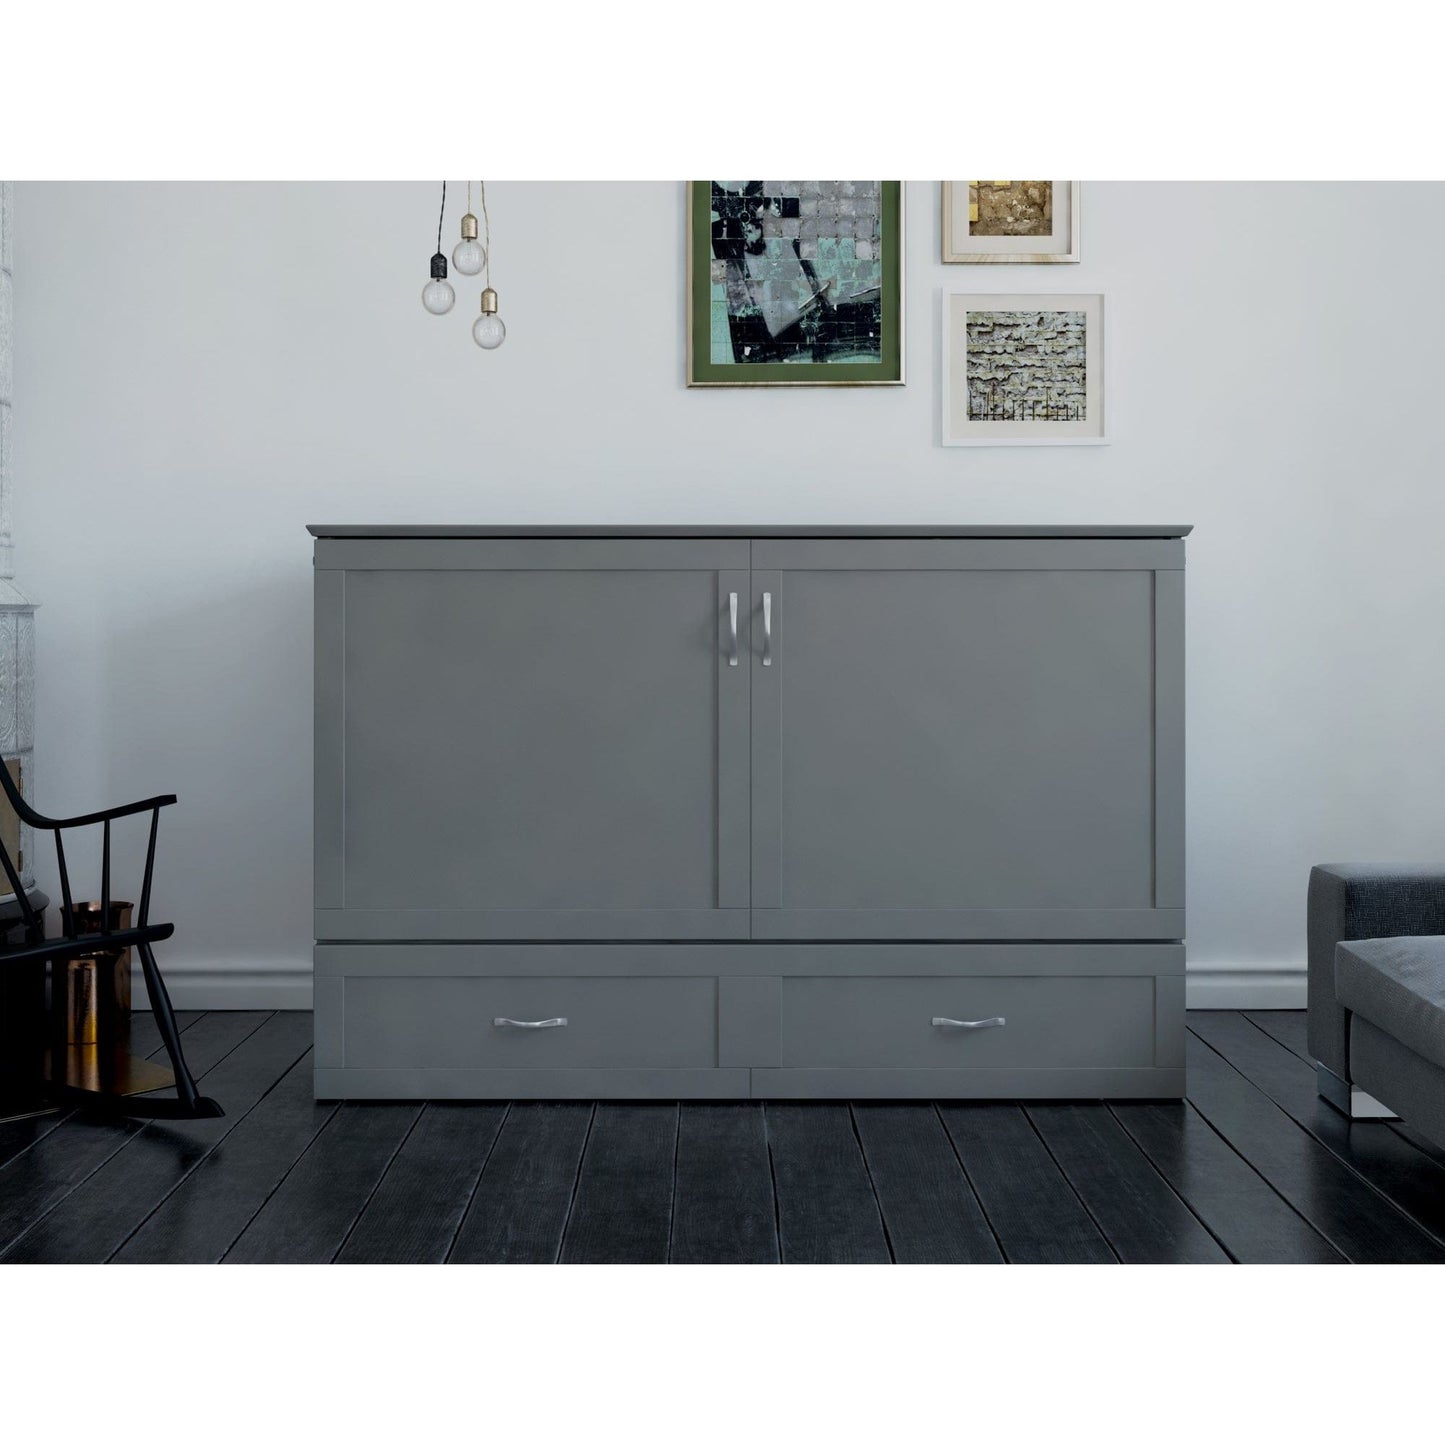 AFI Furnishings Hamilton Murphy Bed Chest Queen with Charging Station